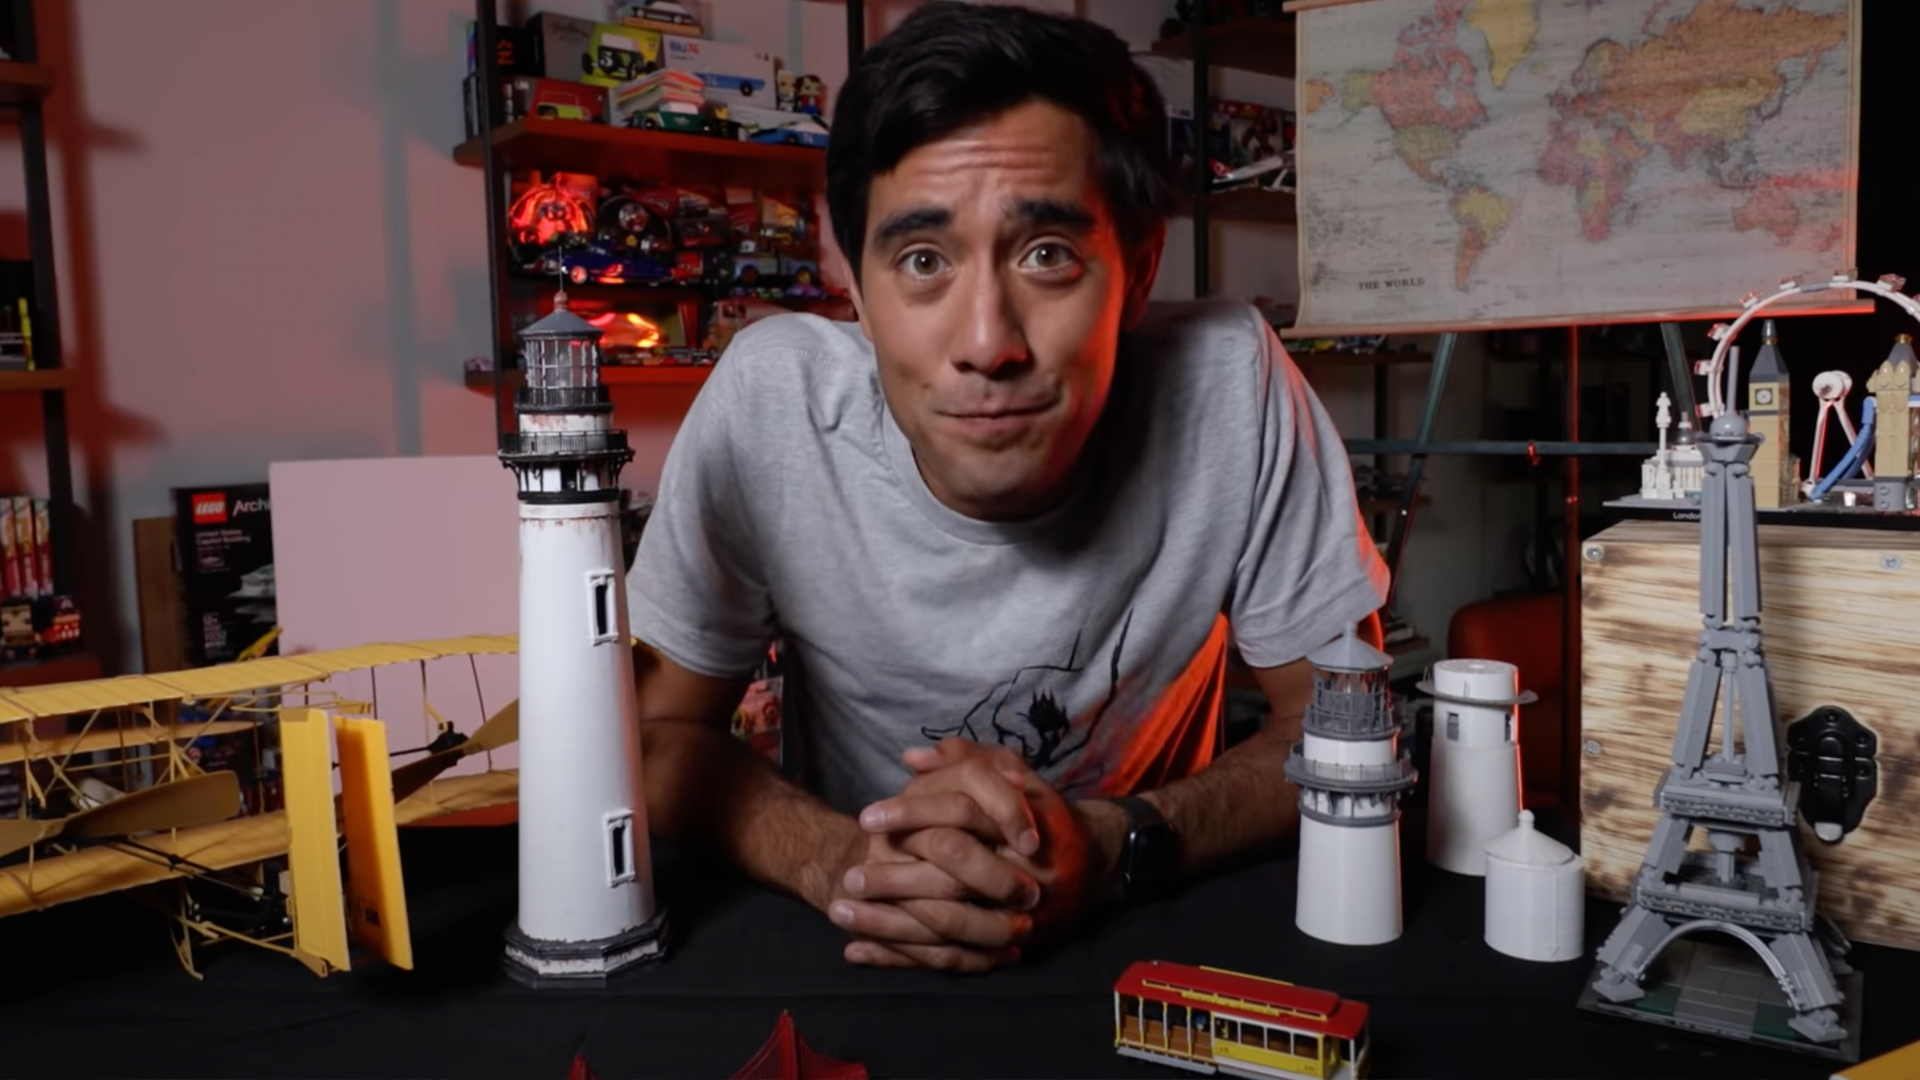 A clip from one of Zach King's amazing video clips